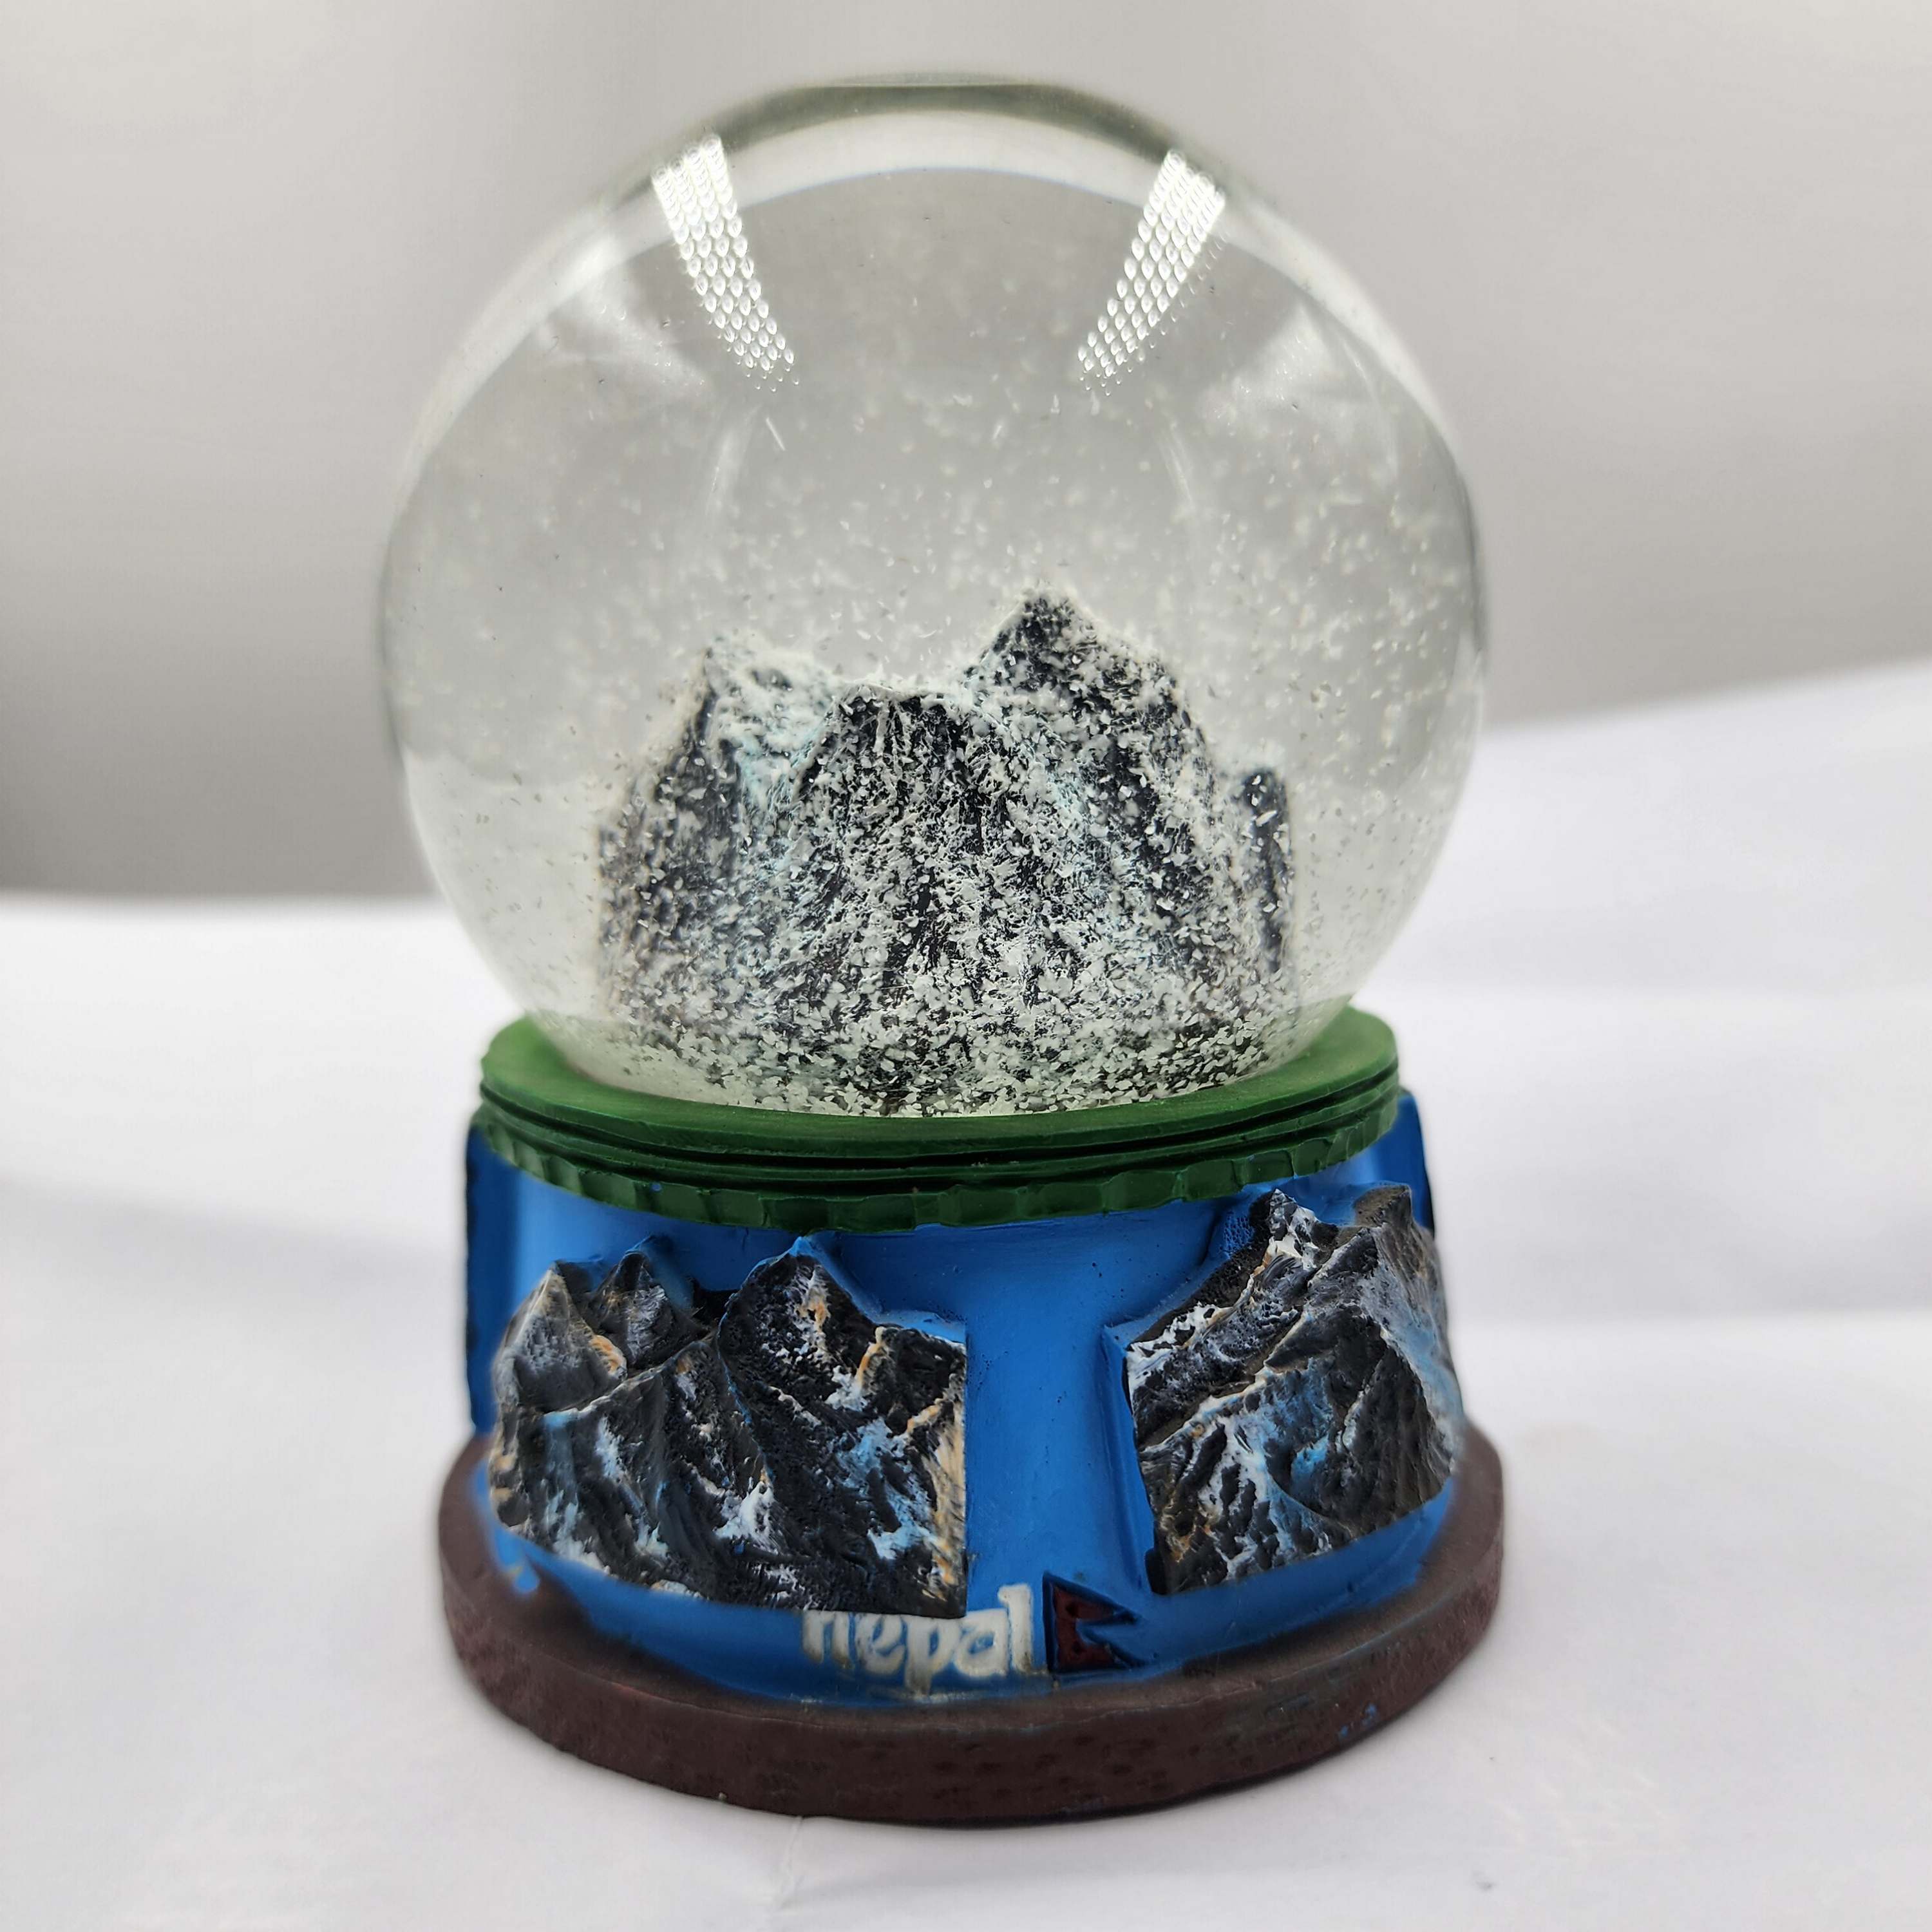 Water Globe Of everest With Made From Fiber, Replica Of The Majestic Mountain Of Nepal